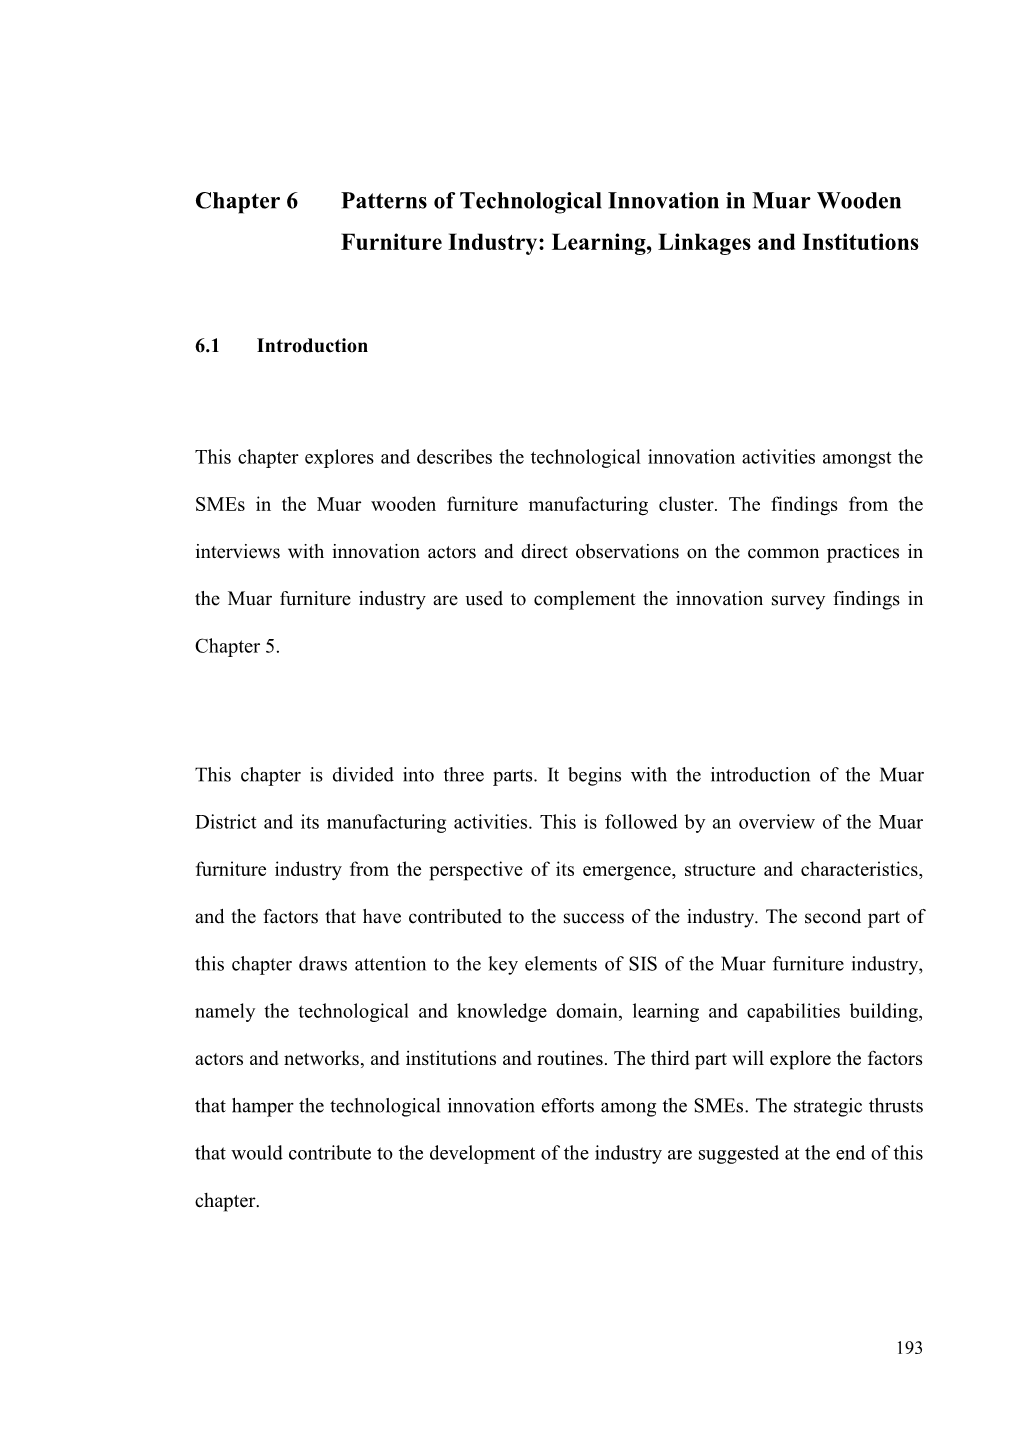 Chapter 6 Patterns of Technological Innovation in Muar Wooden Furniture Industry: Learning, Linkages and Institutions